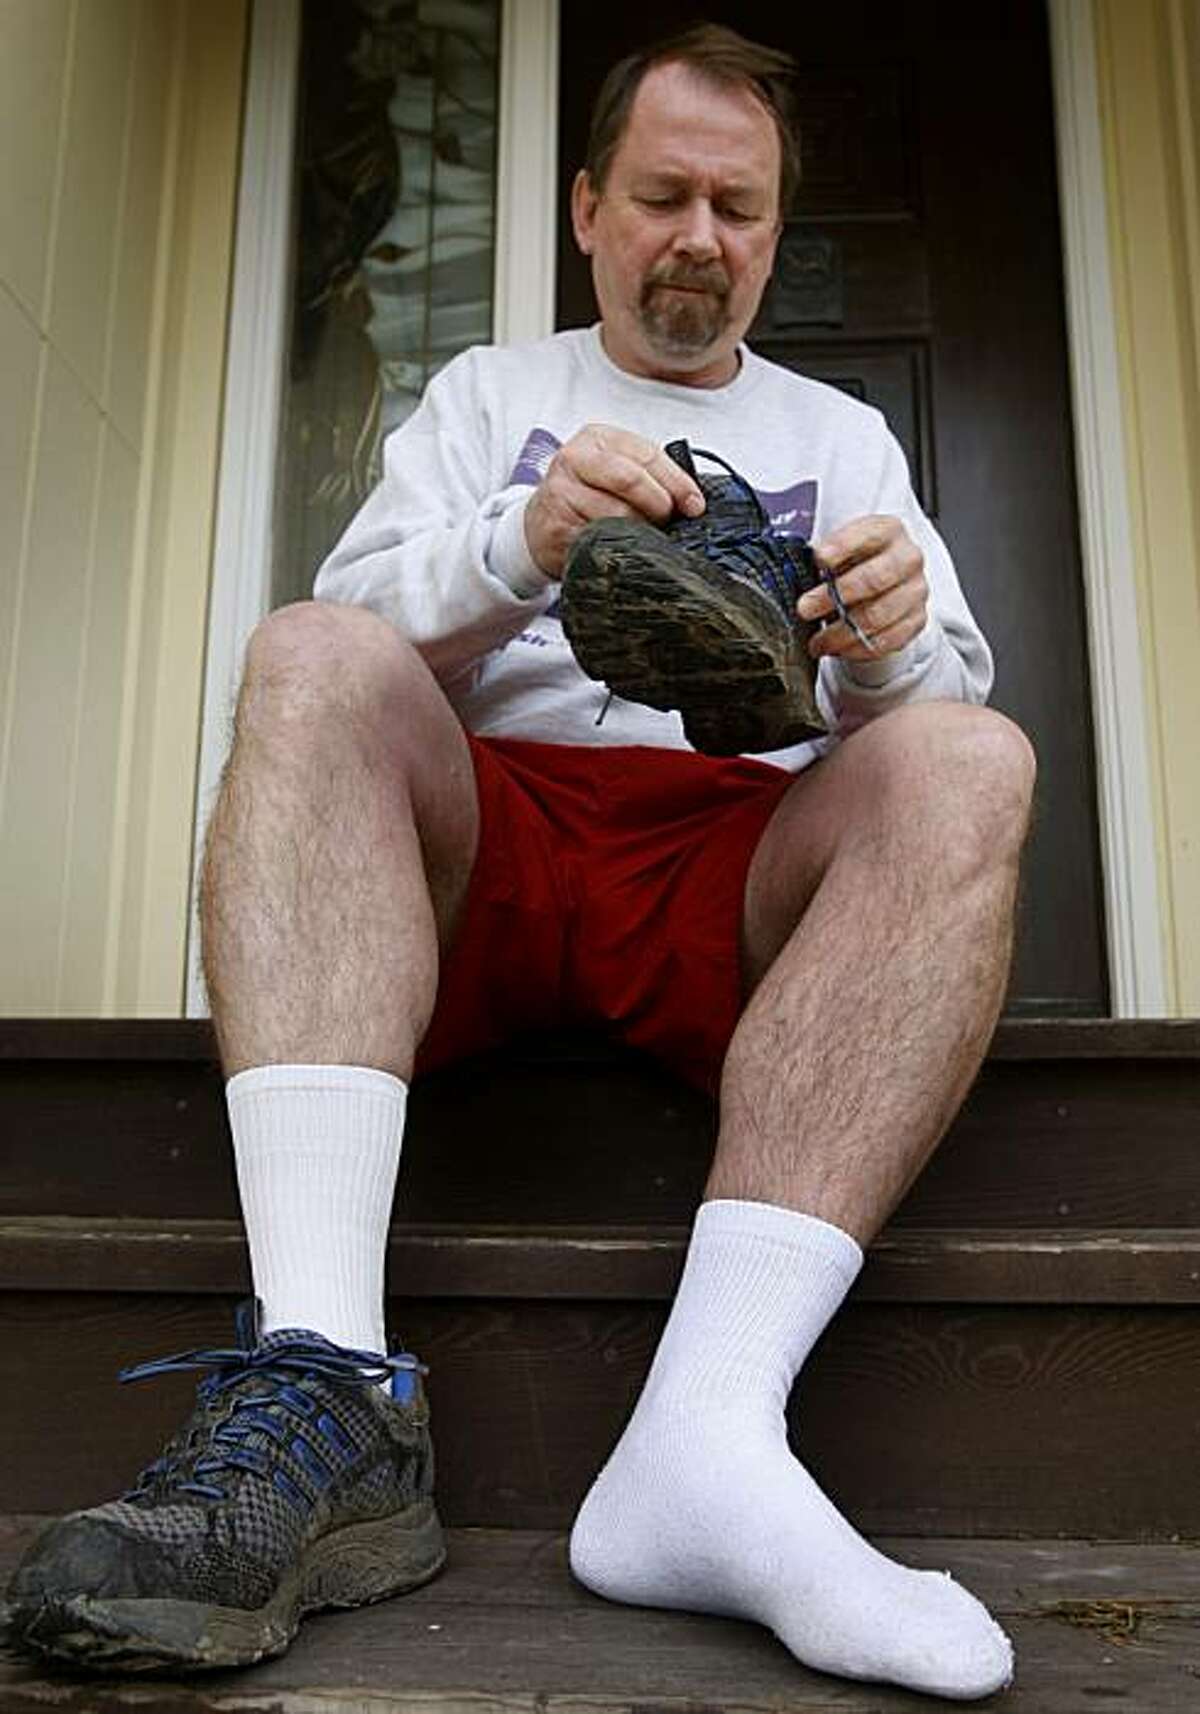 Paul Williams, a scientist at the Lawrence Berkeley National Laboratory, prepares for a morning run at his home in Moraga, Calif., on Friday, Jan. 15, 2010. Williams has spent the past 20 years studying the science of running, using over 100,000 runners participating in his research.